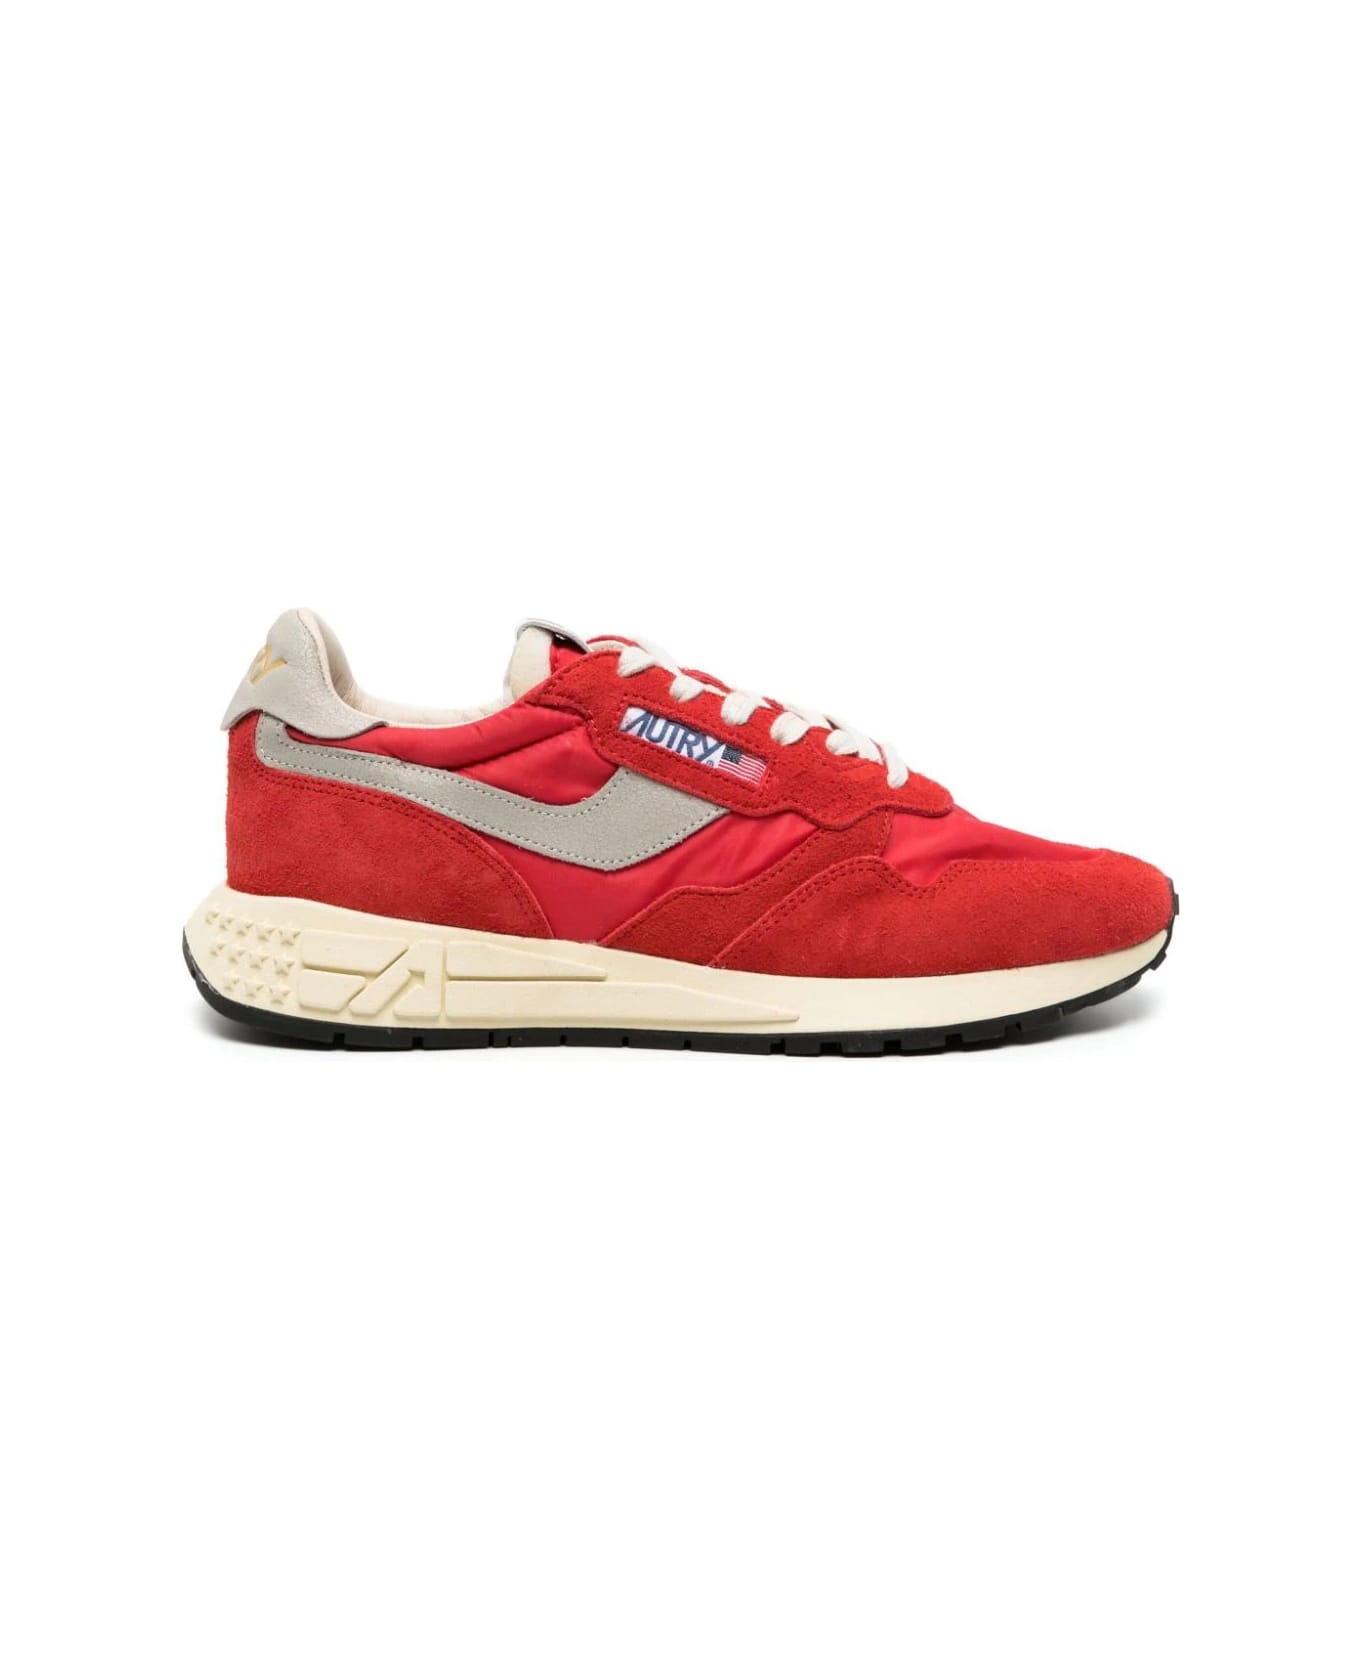 Autry Reelwind Low Nylon And Suede Sneakers - Red